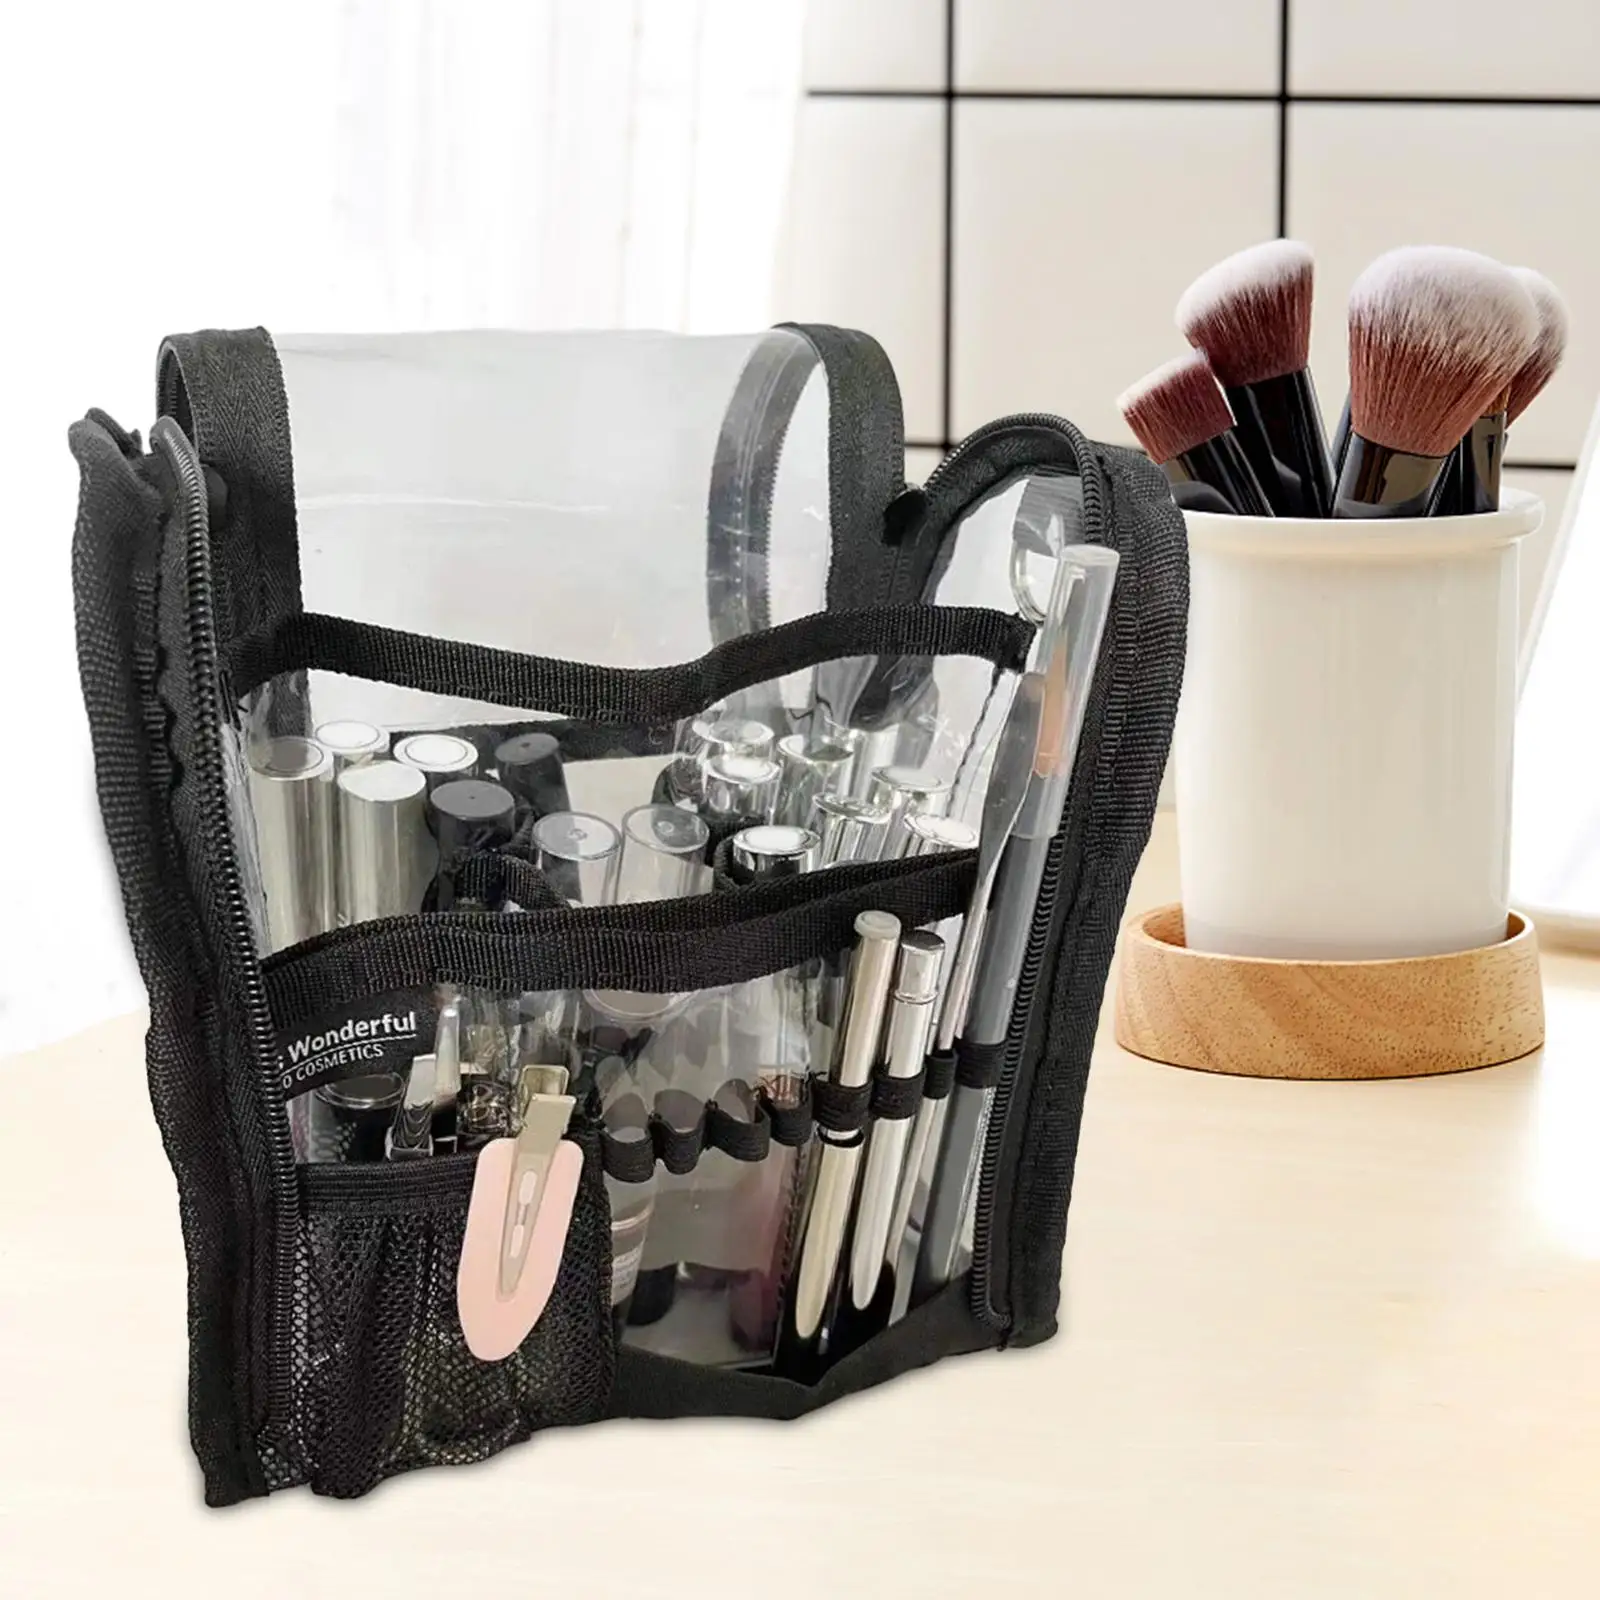 Clear Toiletry Bag Large Clear Makeup Bag Professional Travel Cosmetic Bag, Makeup Artists Bag for Bathroom Office Home